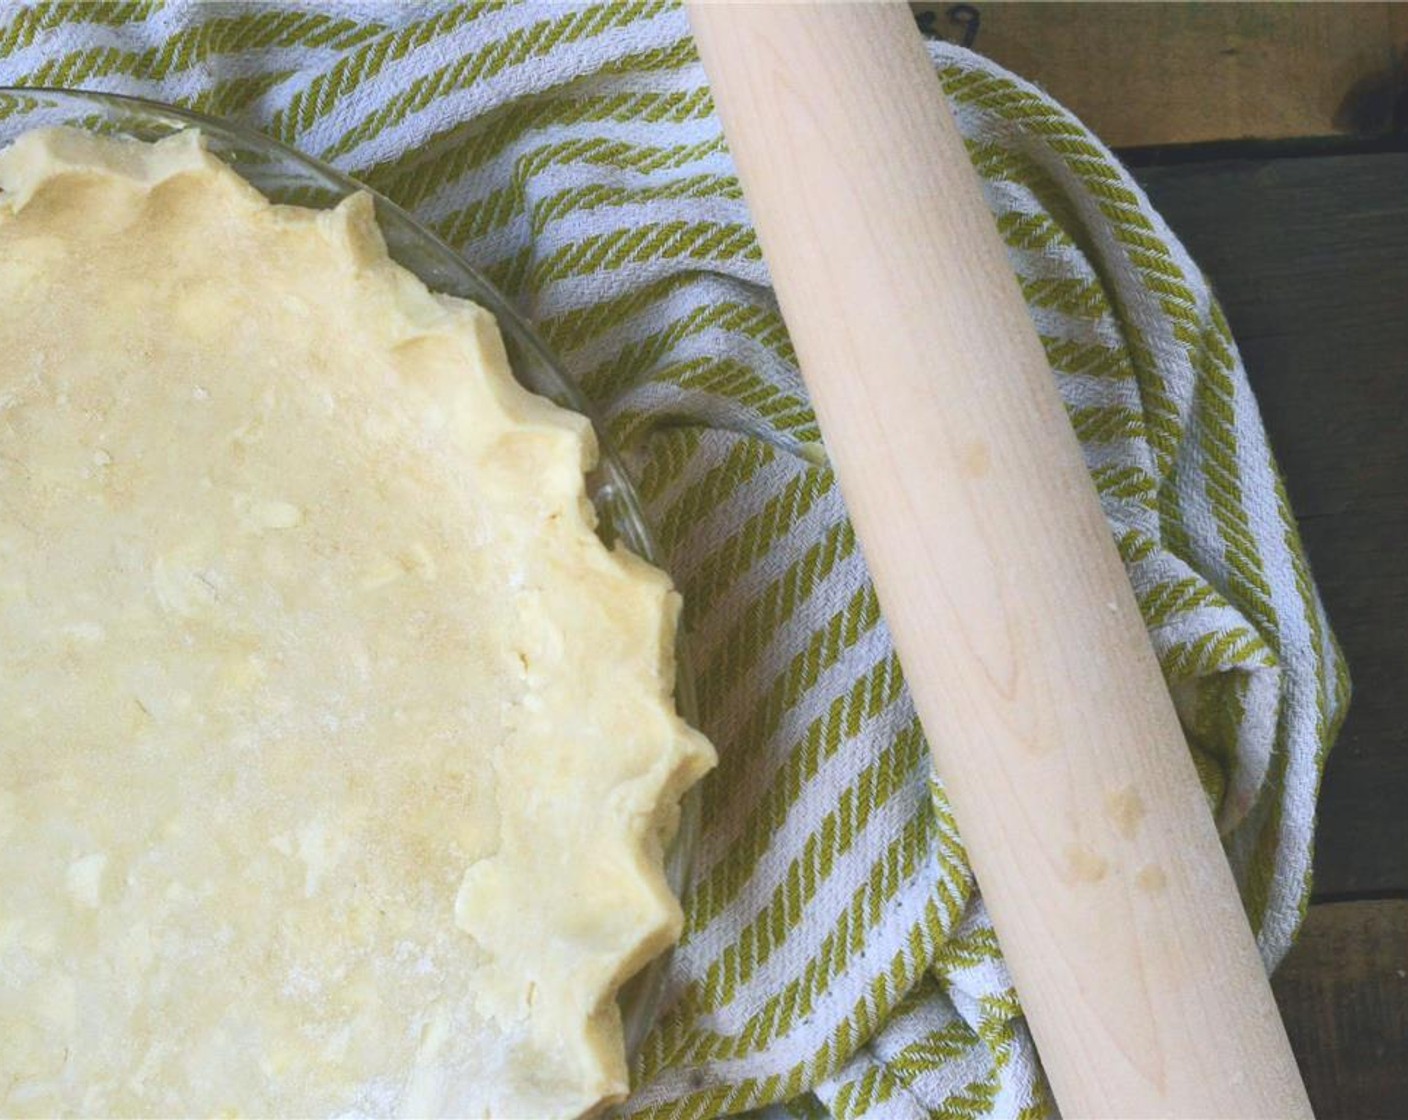 step 9 Fit dough into a 9 inch pie plate, trim off excess dough around edges - leaving about 1/2 inch overhanging the edge. Place pie plate in freezer for 15 minutes. Prepare filling.